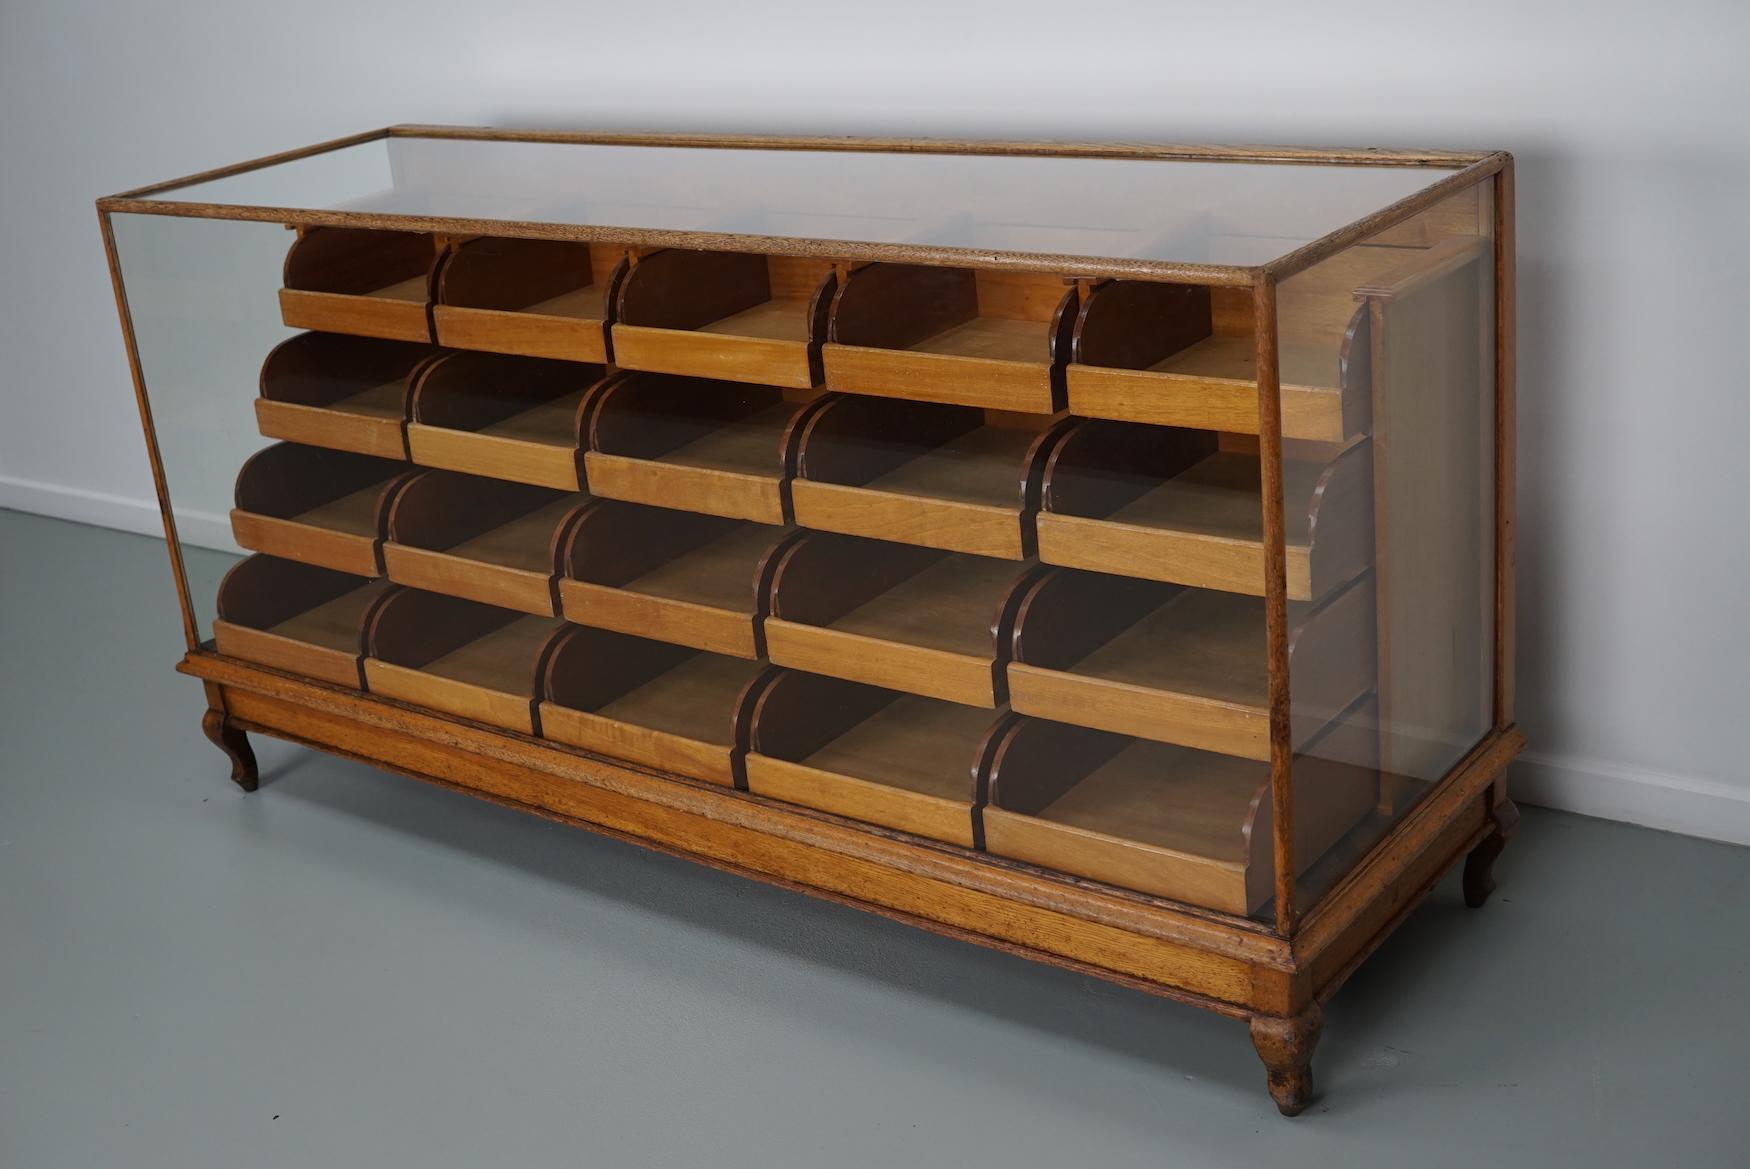 This oak haberdashery shop counter dates from the late 19th century and was made in England. It features a solid wooden frame, a glass casing with 20 drawers in mahogany with brass handles.